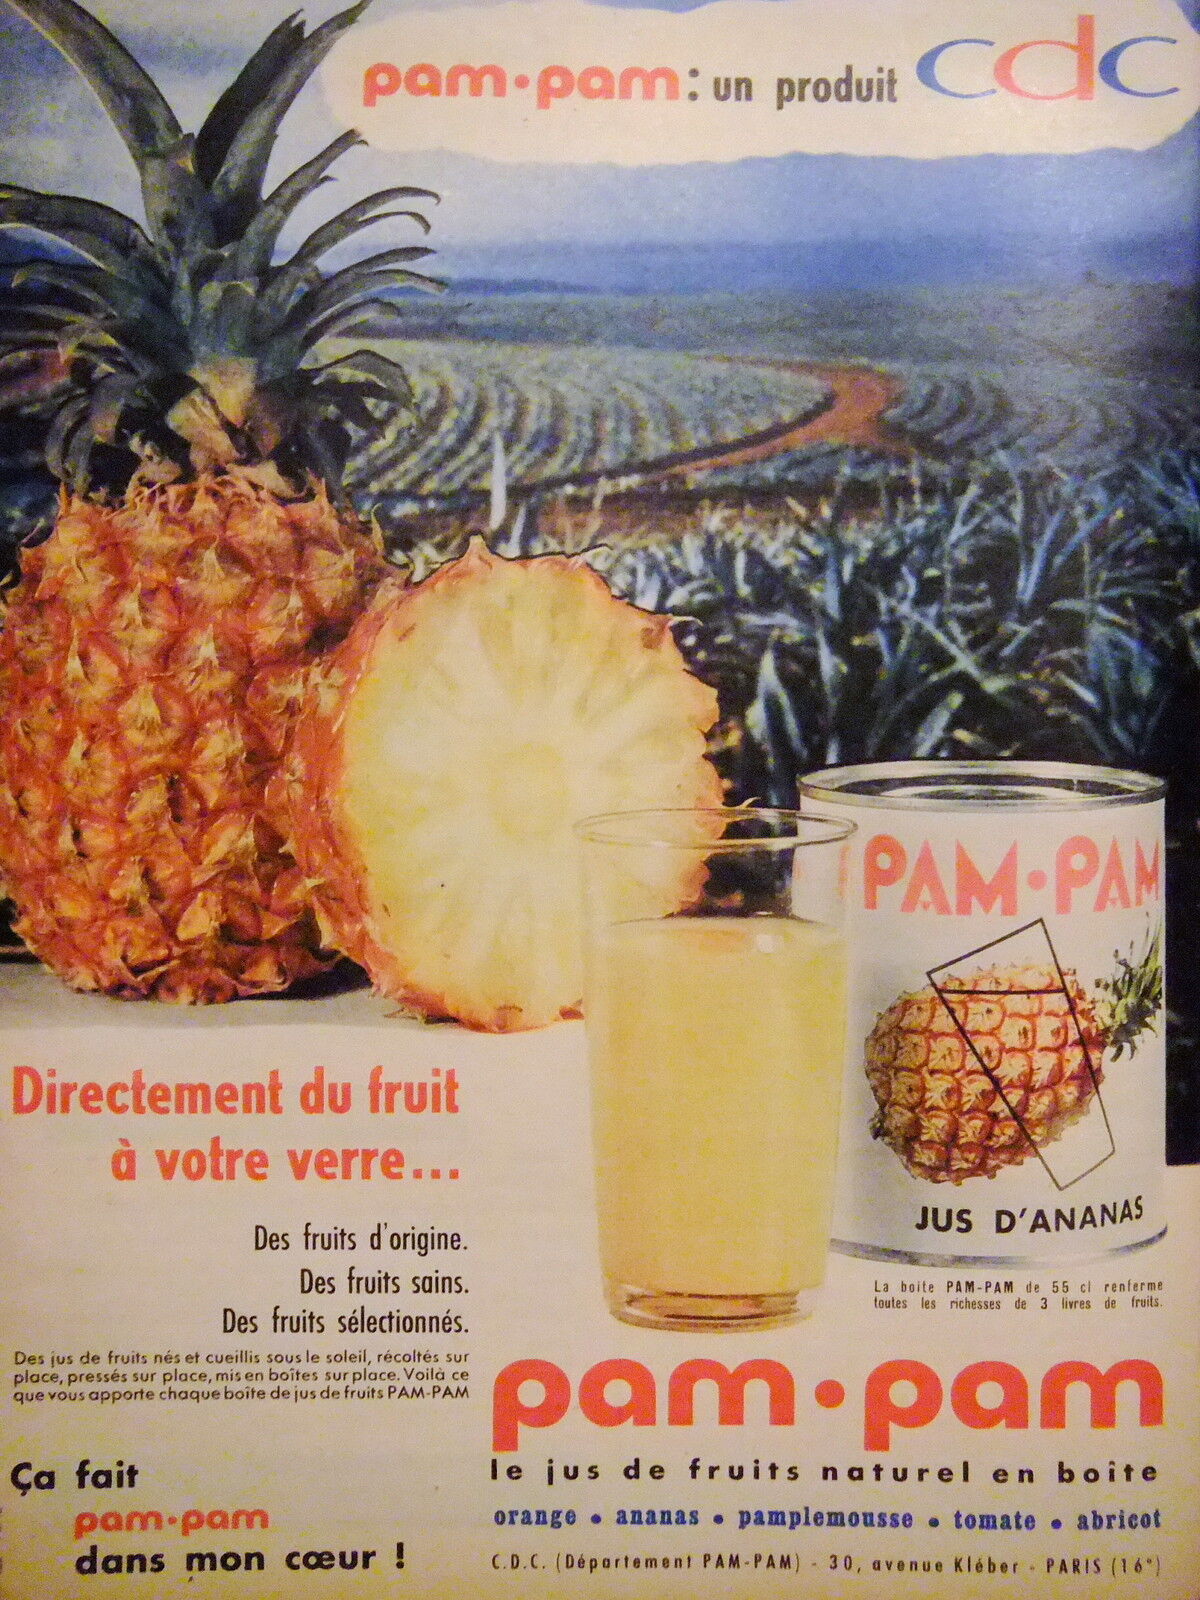 1959 PAM-PAM DIRECT FROM NATURAL HEALTHY FRUIT TO YOUR GLASS PRESS ADVERTISEMENT